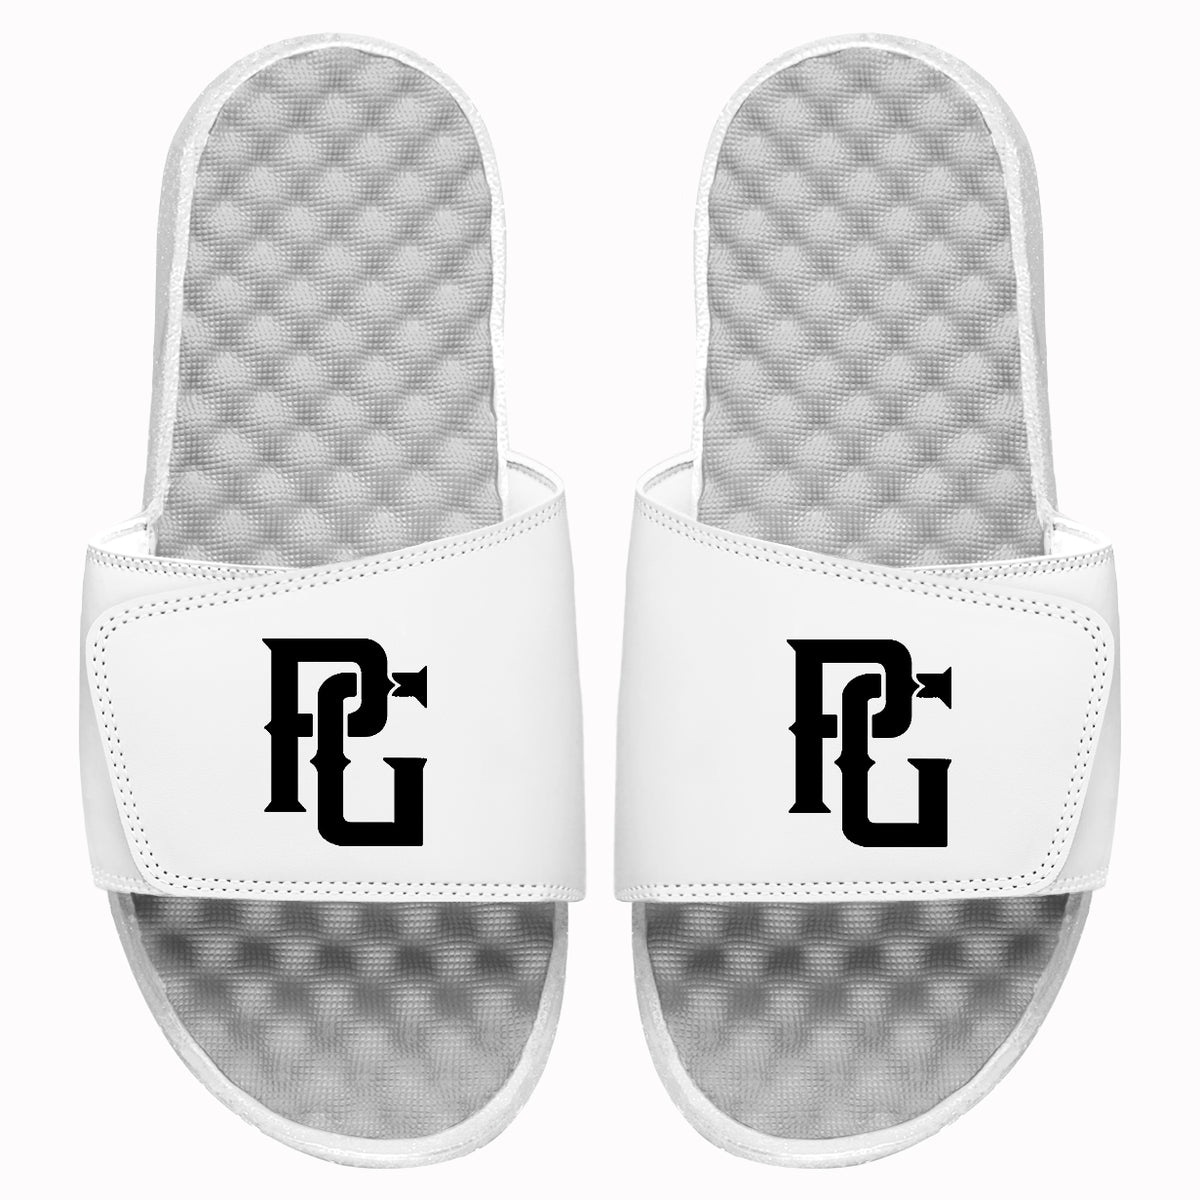 Perfect Game x ISlide Primary Slide Sandals Perfect Game Apparel